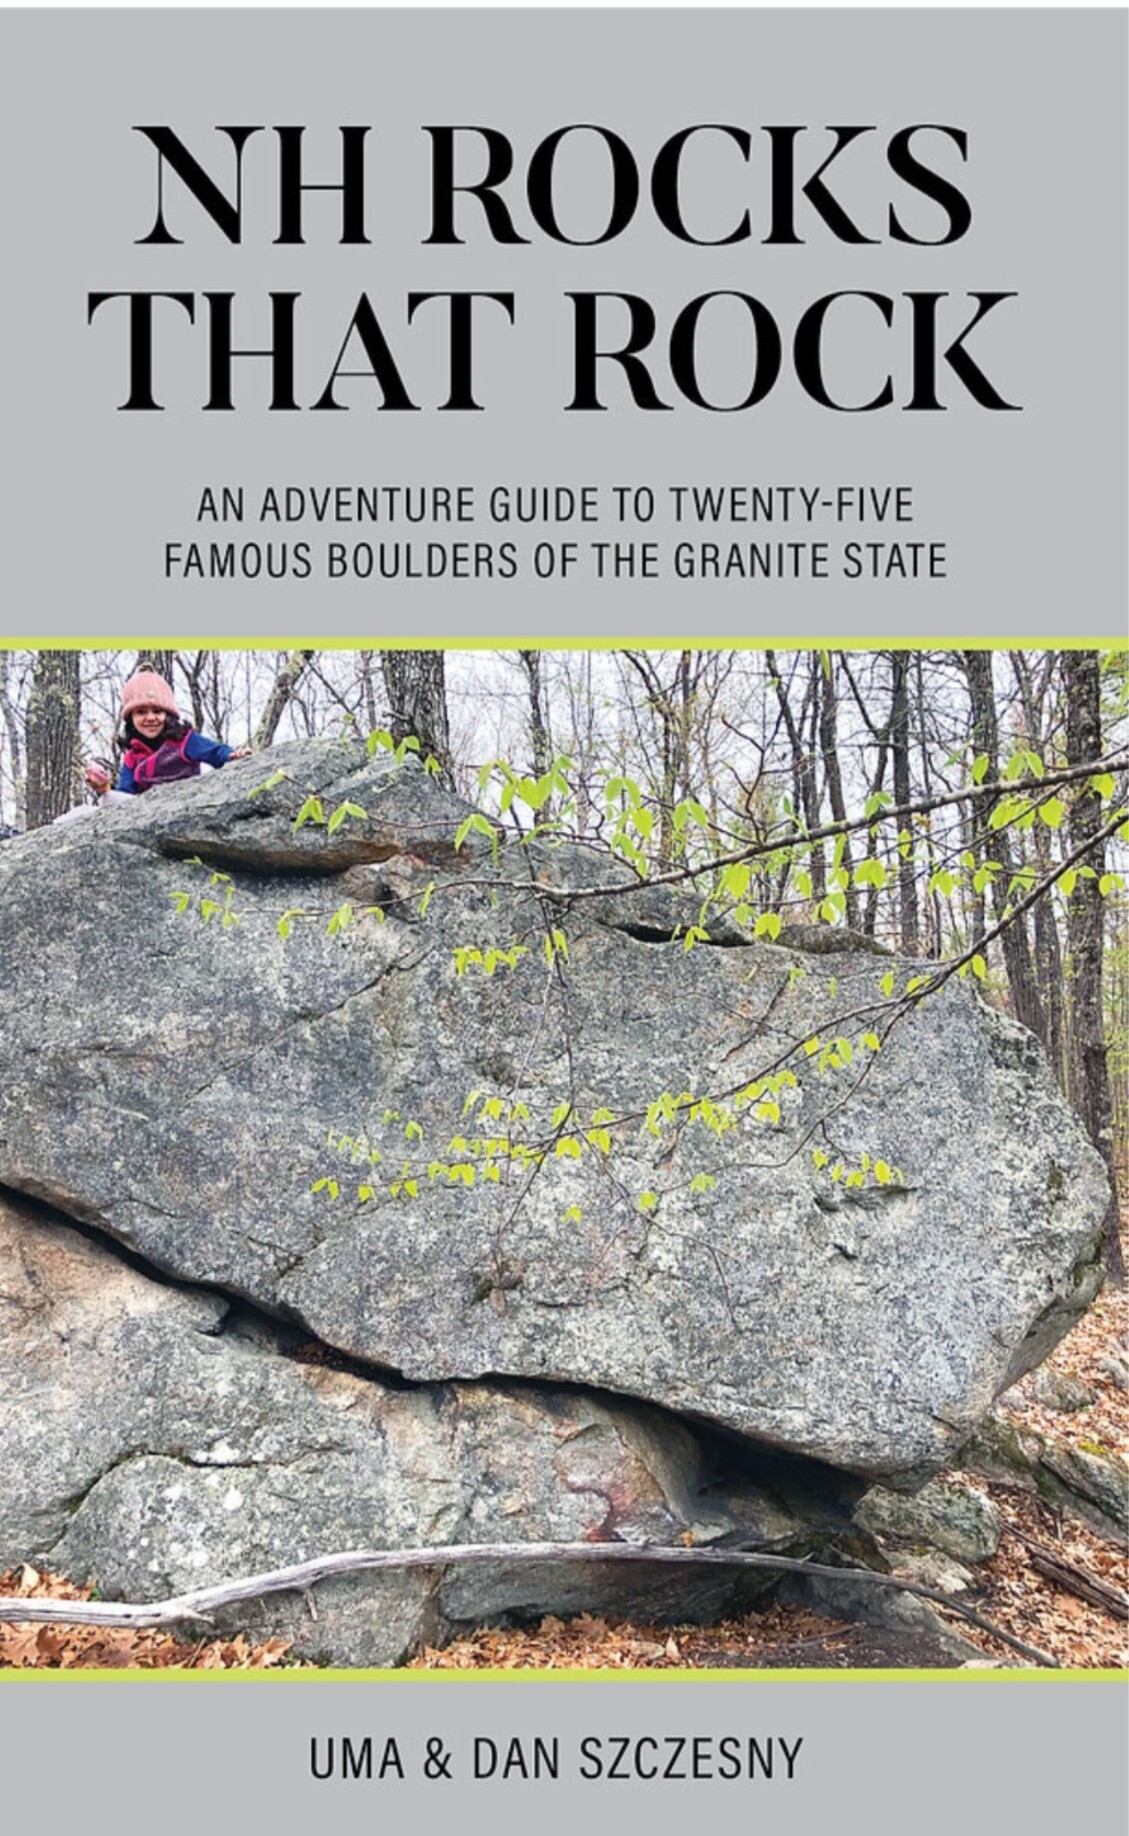 NH Rocks That Rock: An Adventure Guide to Twenty-Five Famous Boulders of the Granite State